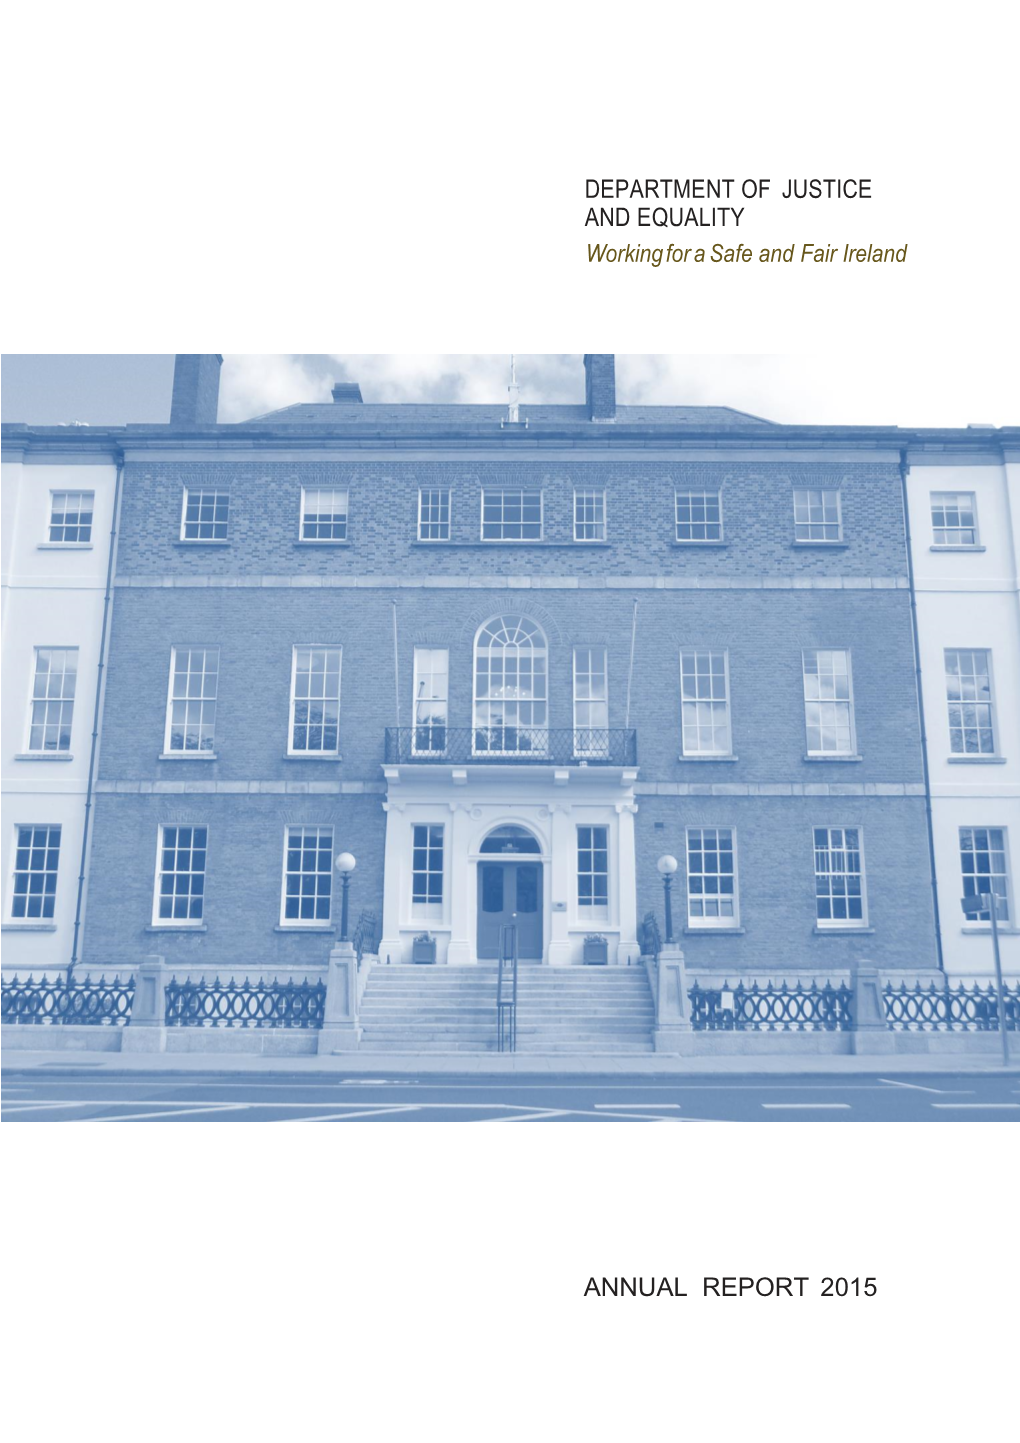 Department of Justice and Equality Annual Report 2015